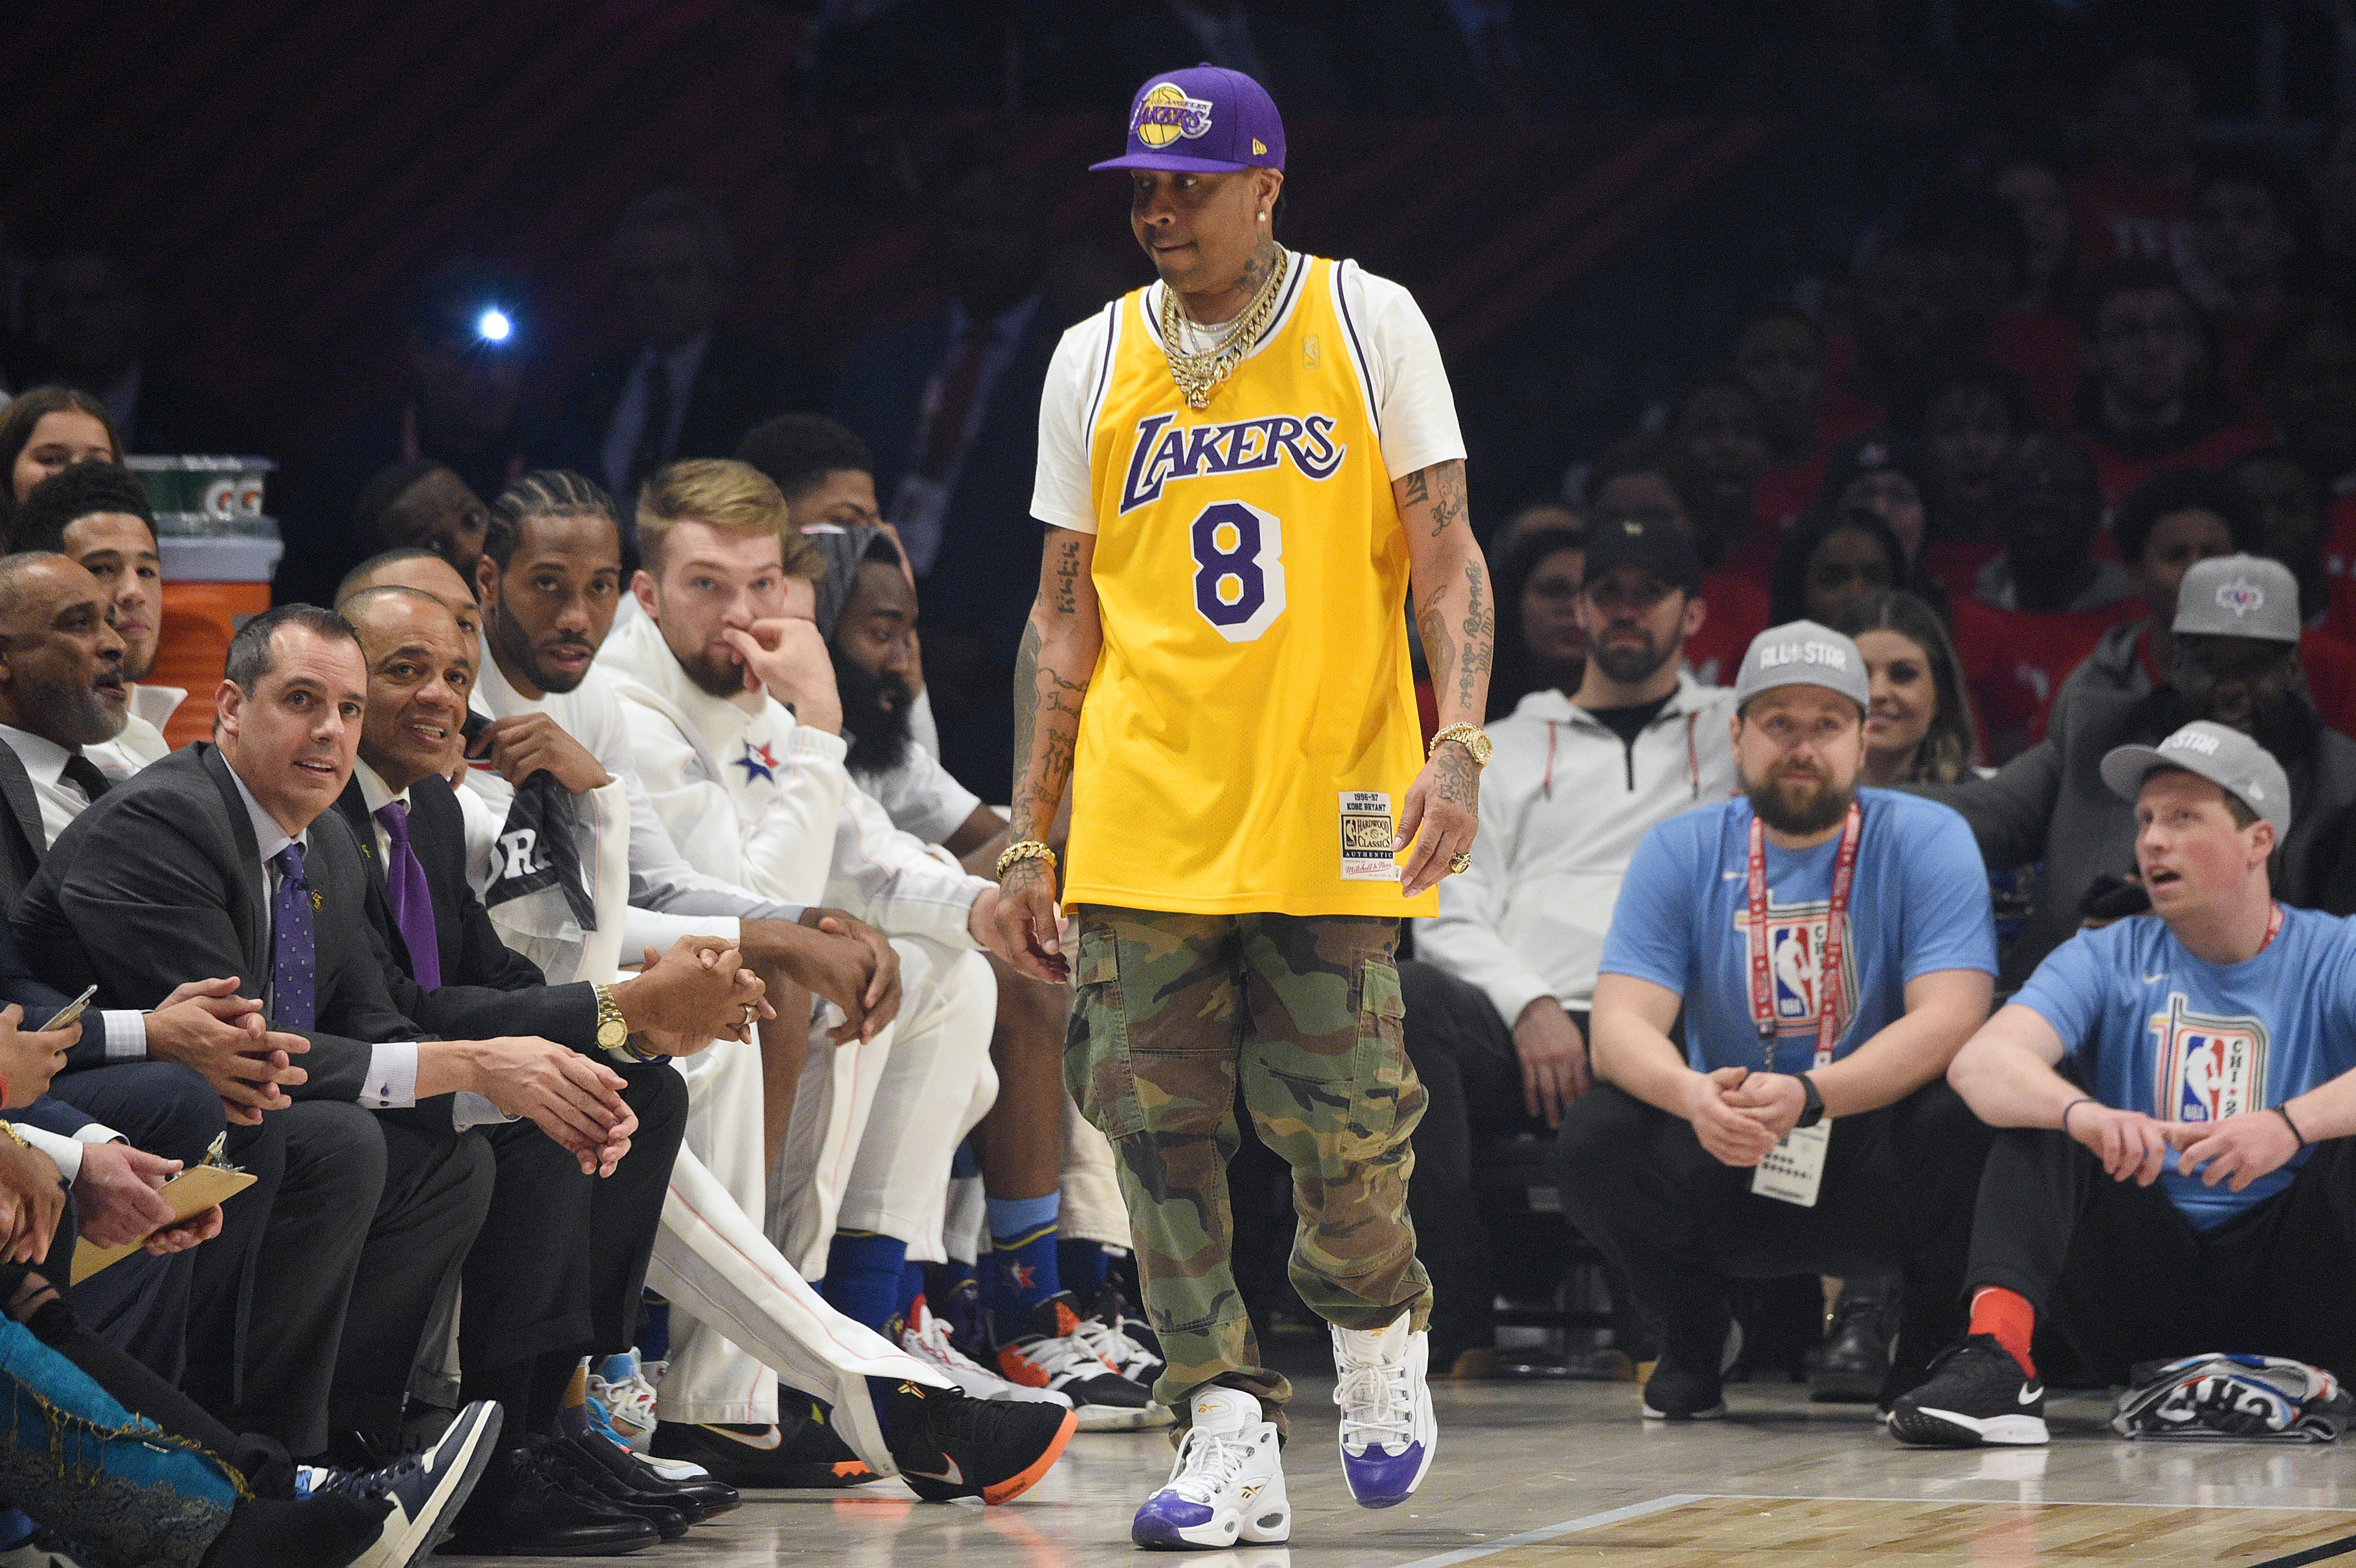 Allen Iverson attends the 2020 NBA All-Star Game